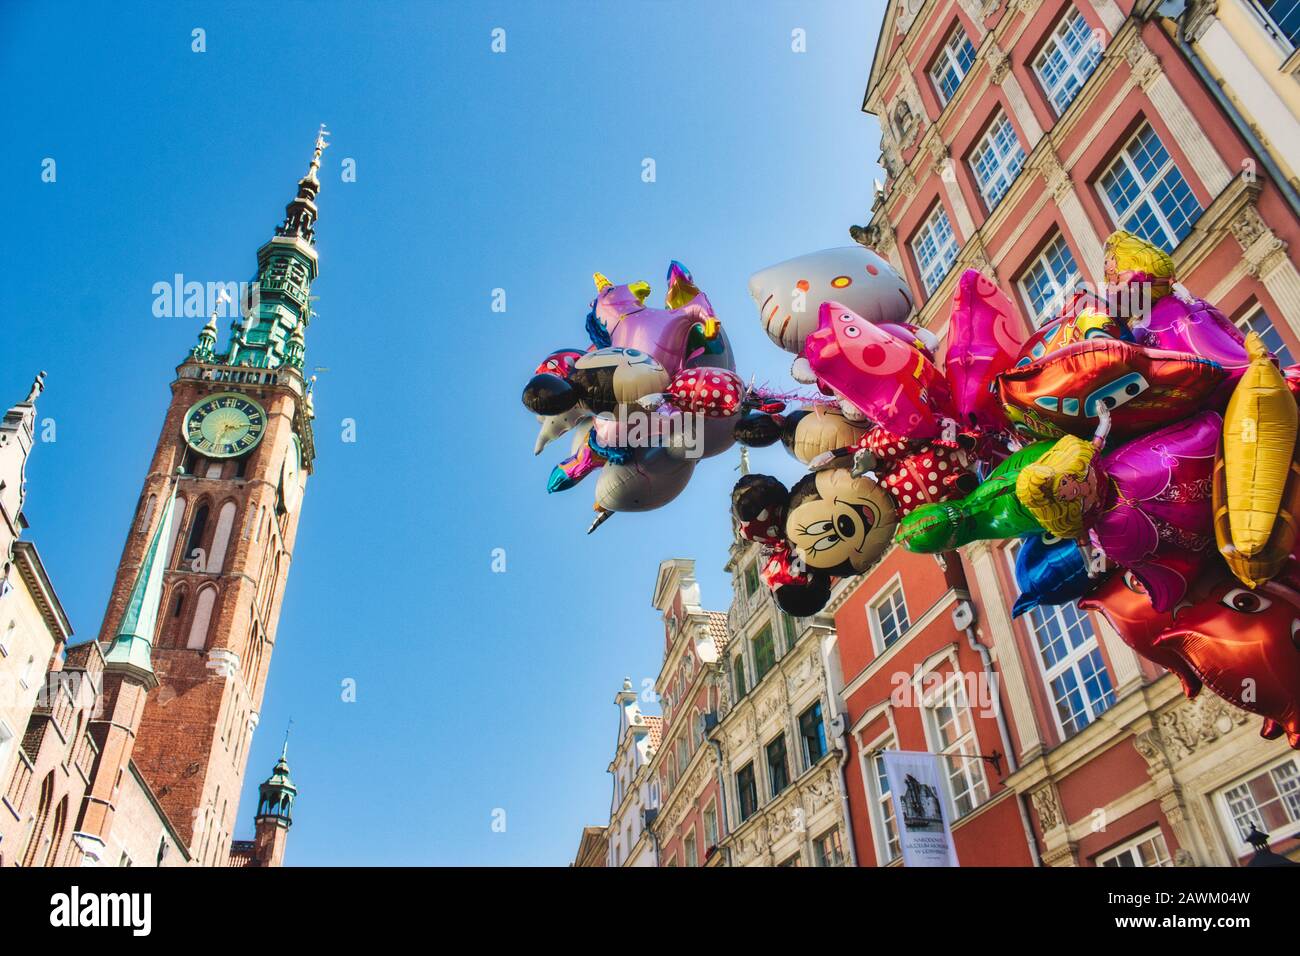 Gdansk / Poland - August 8 2019: Balloons shaped like popular children´s characters being sold in the main square in the city center of Gdansk, Poland Stock Photo